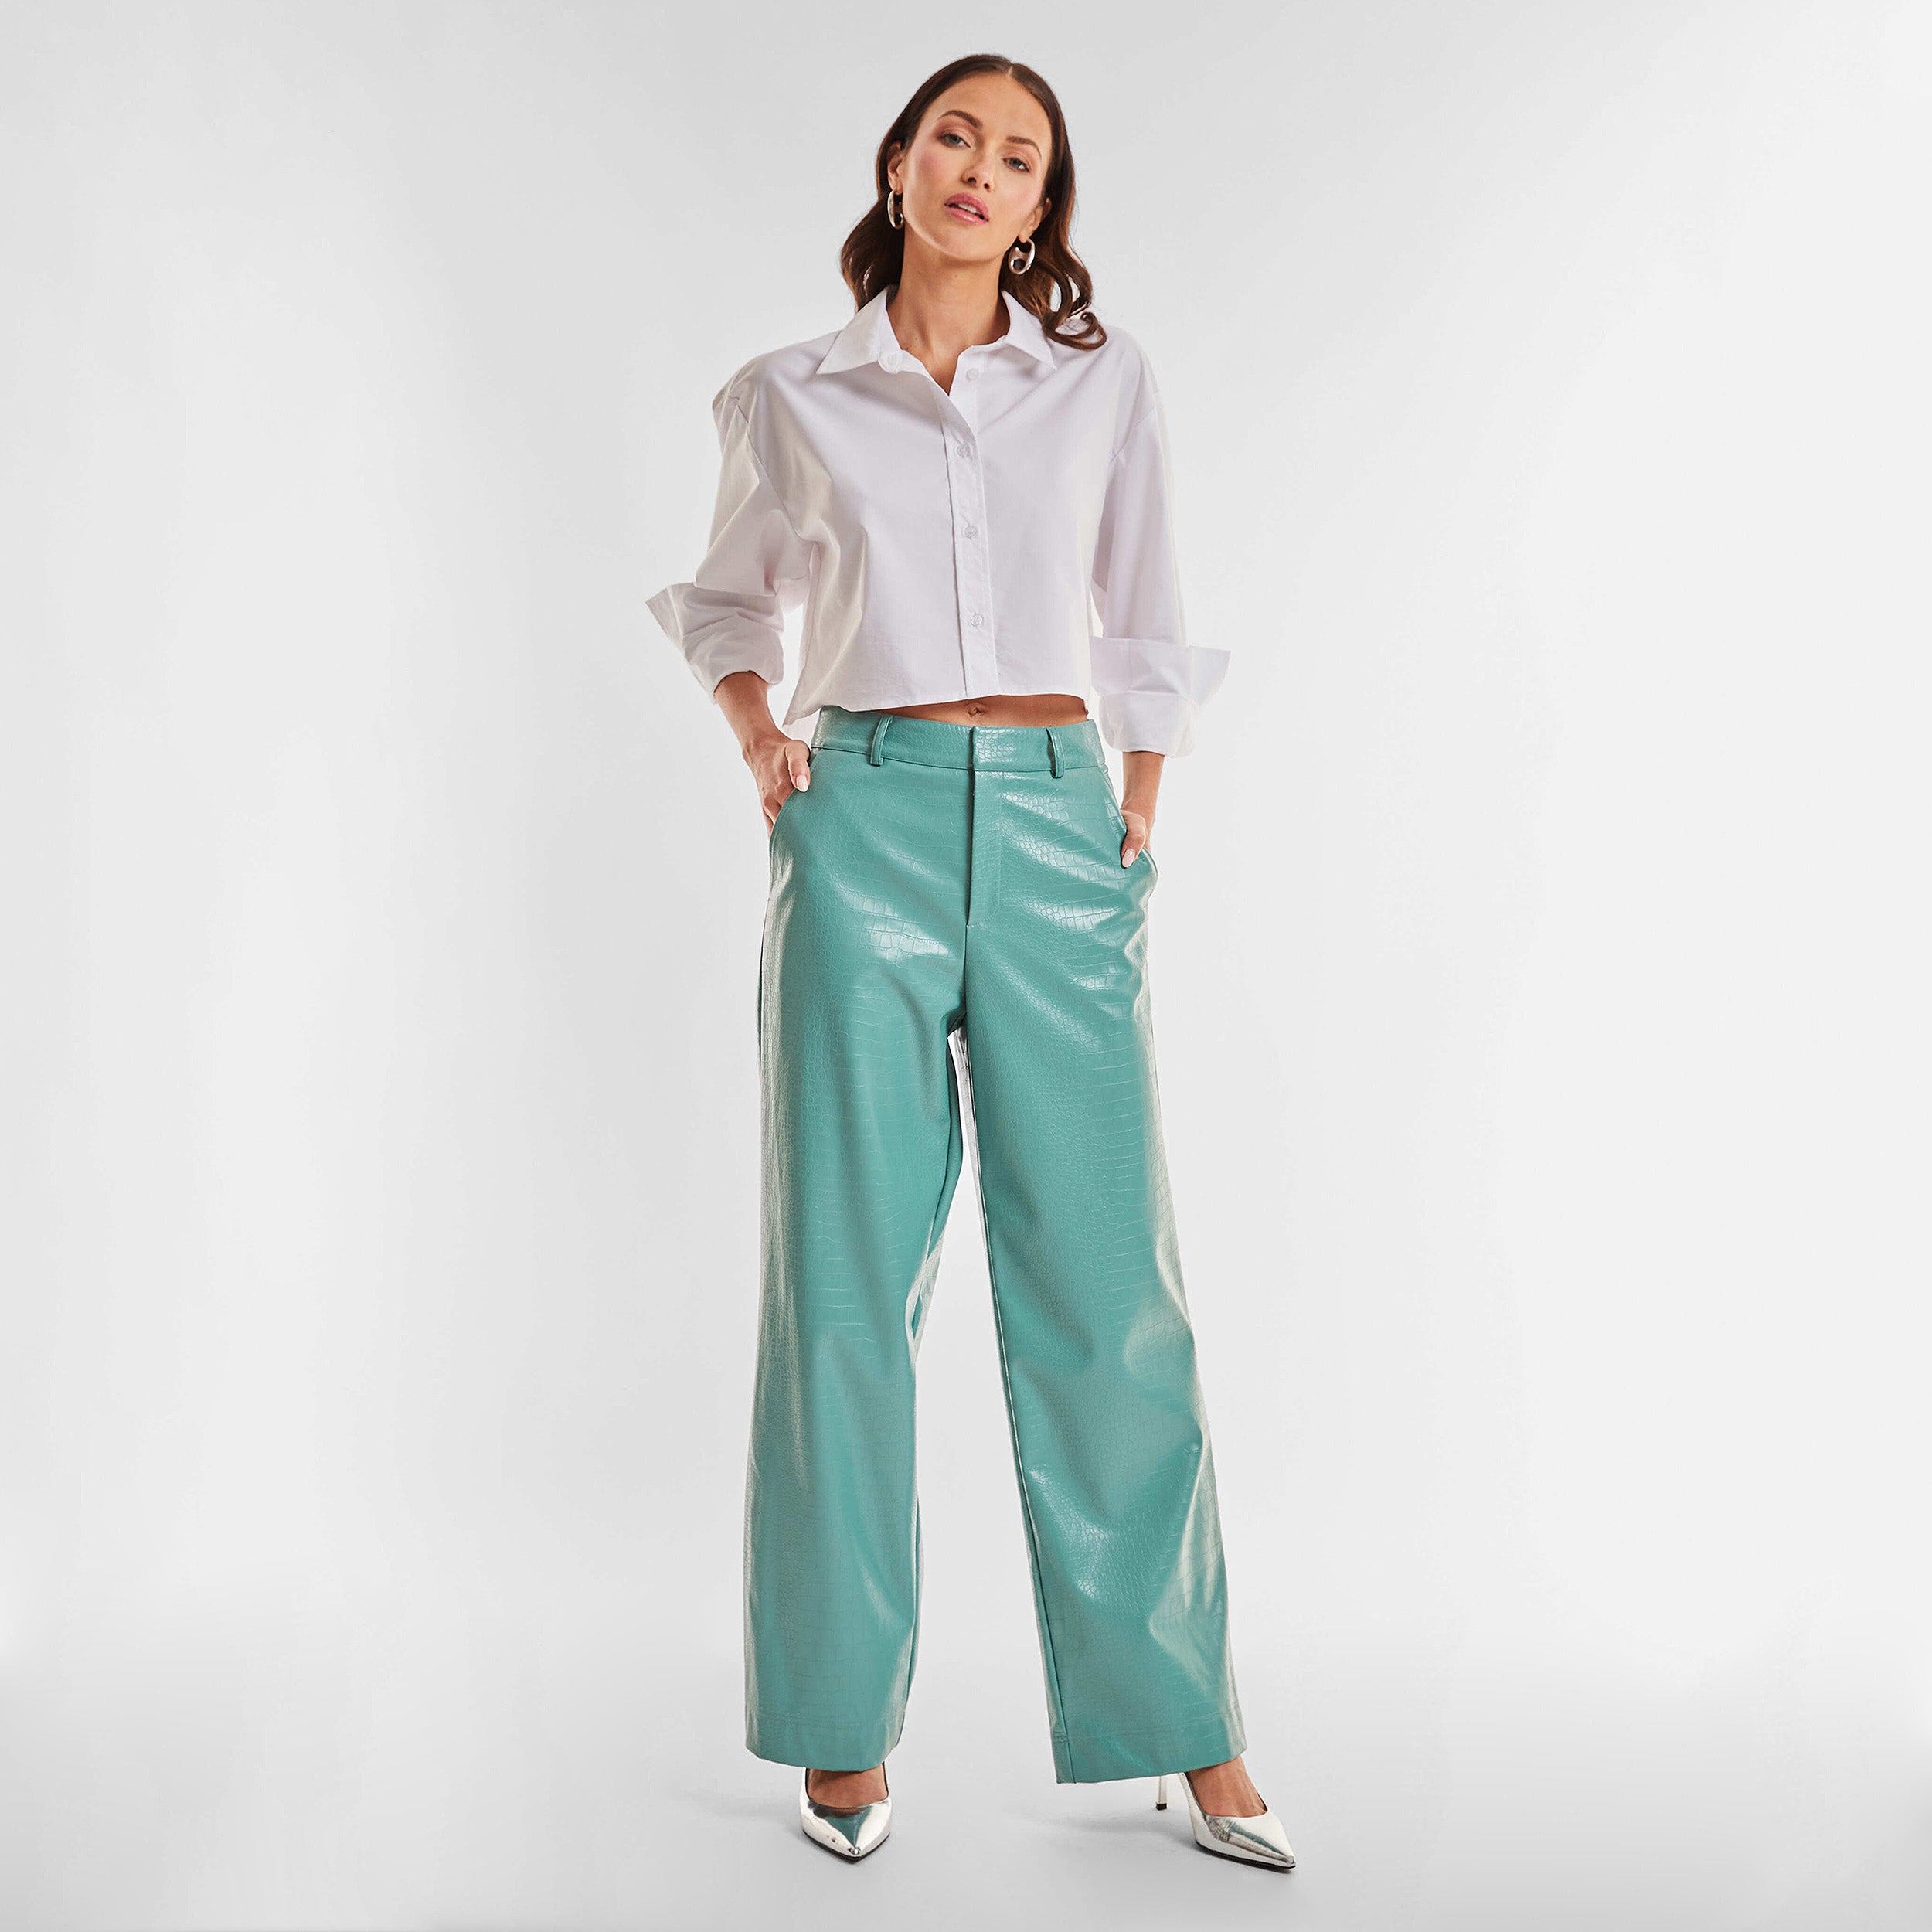 Full body front view of woman wearing sage colored faux leather croco pattern embossed wide leg pant and cropped white button up shirt